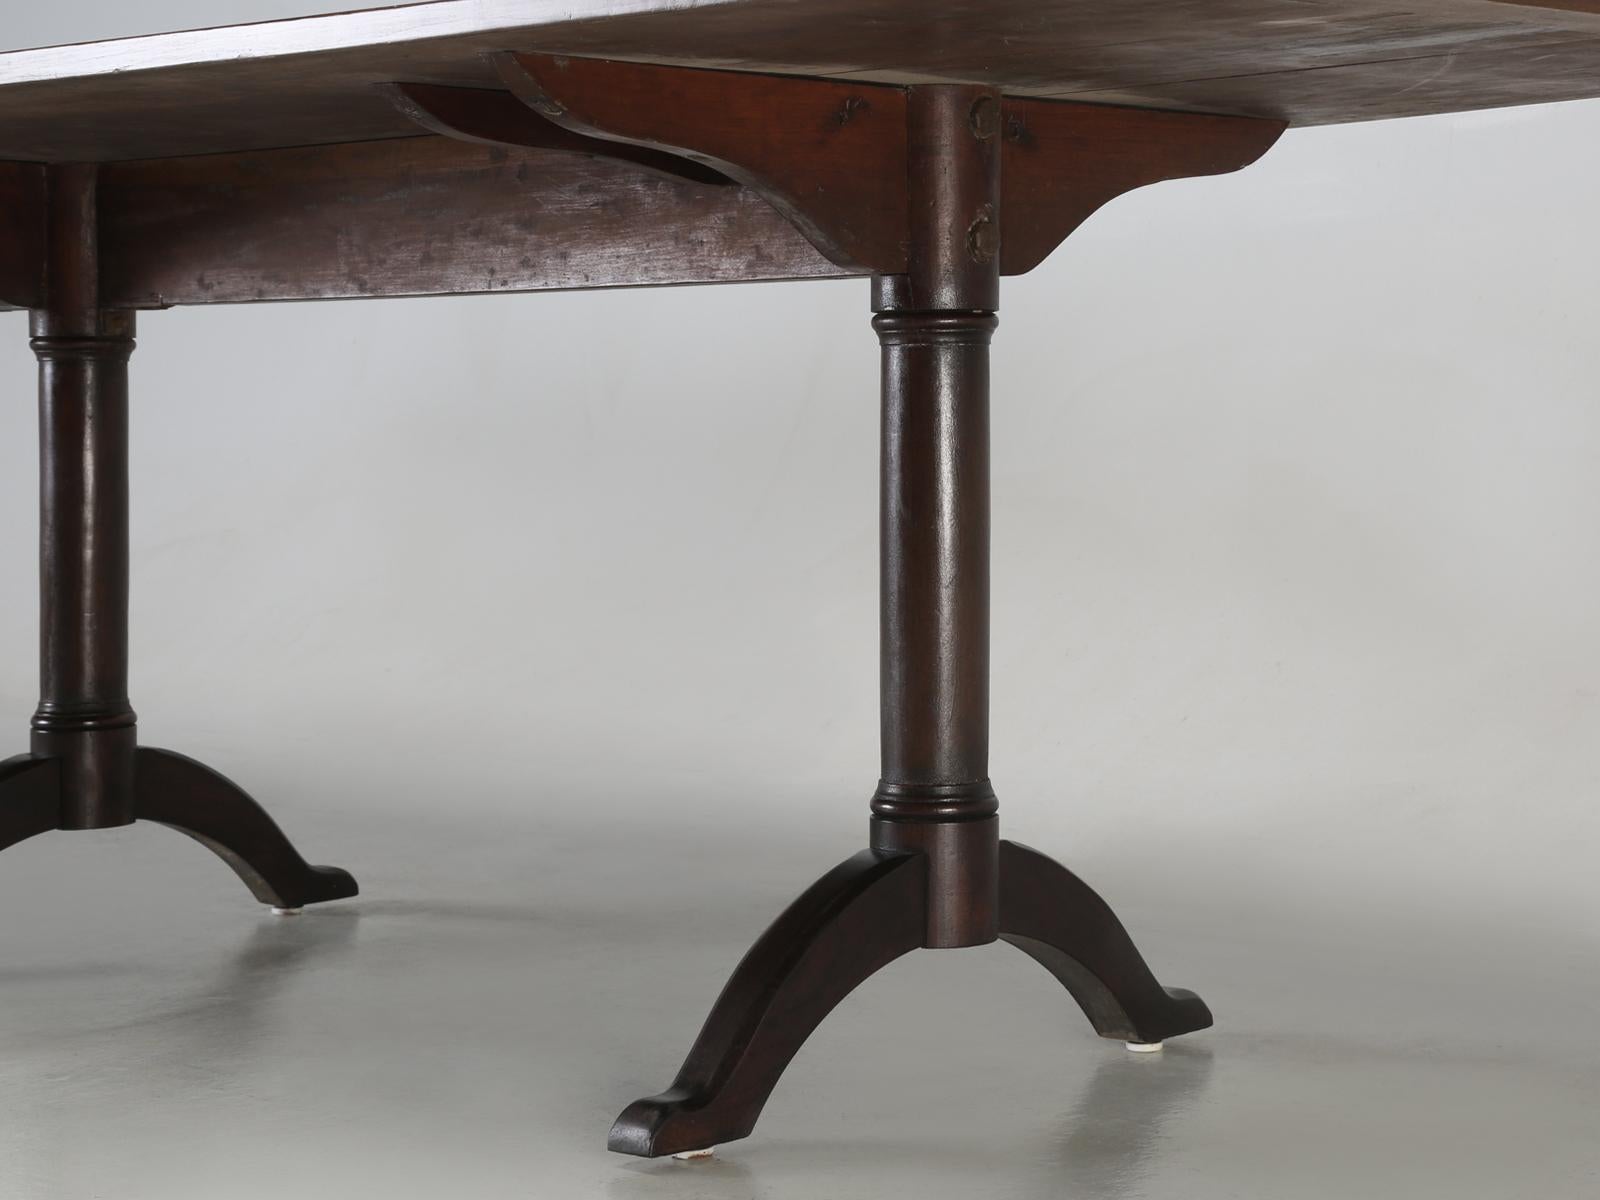 Antique Shaker Cherry Wood Trestle Dining Table, circa 1830 4